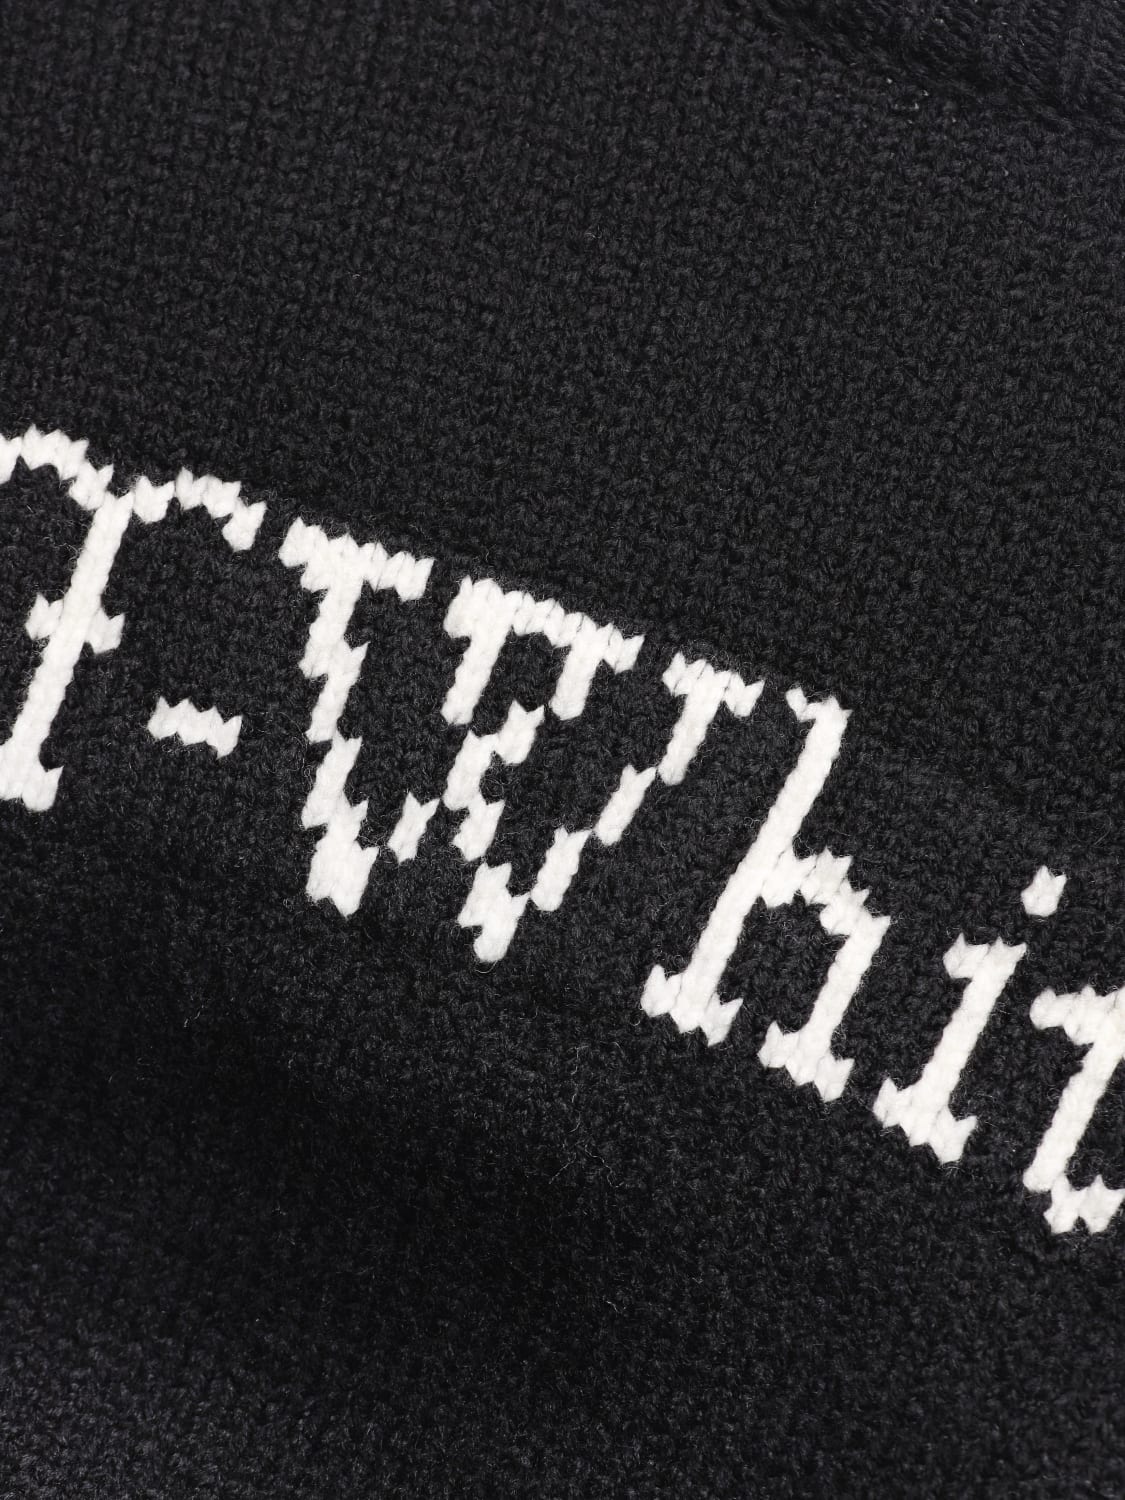 OFF-WHITE: sweater for man - Black | Off-White sweater OMHE167F23KNI002 ...